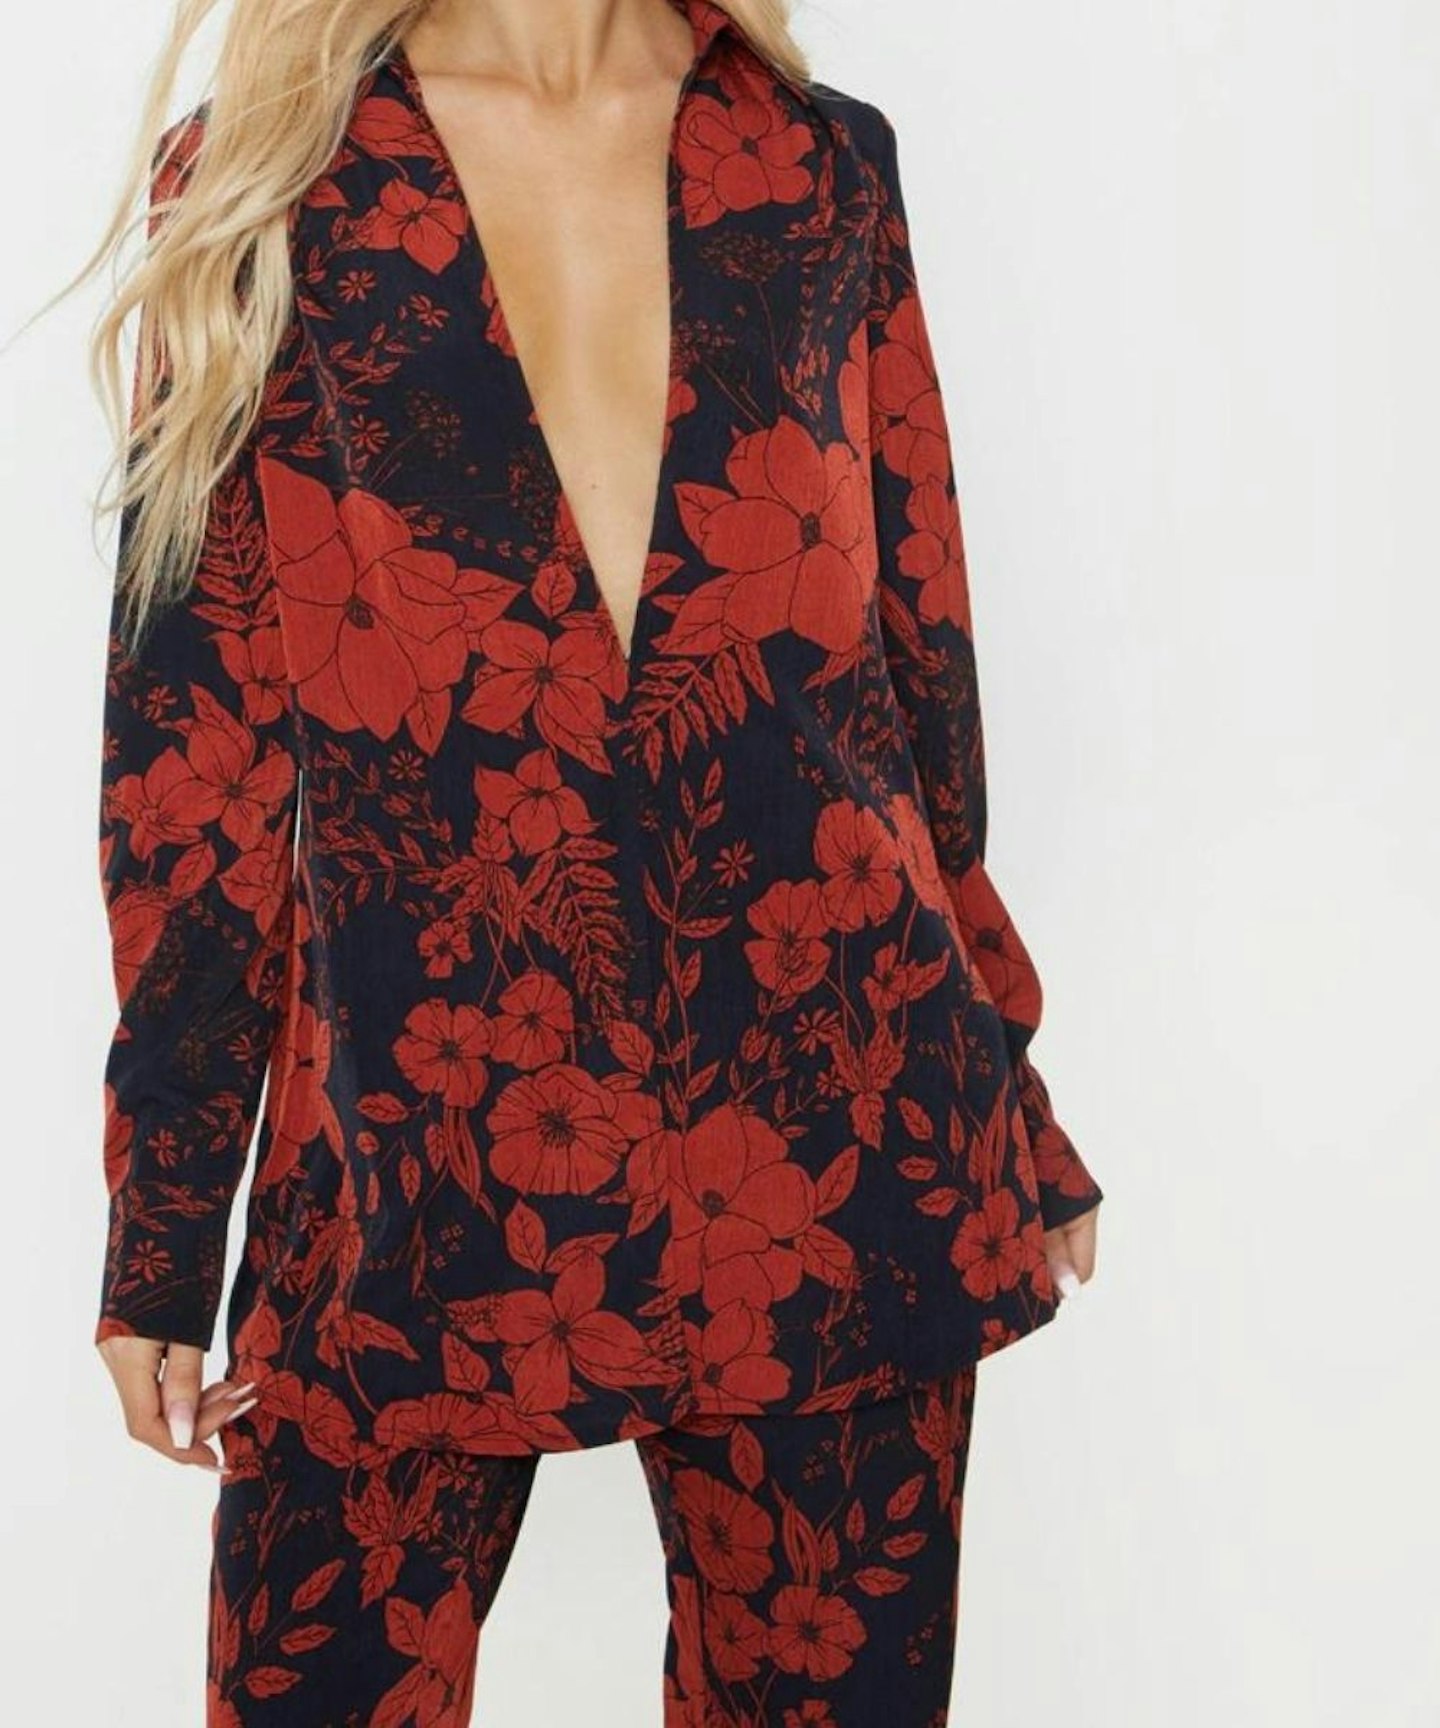 Red Floral Print Oversized Shirt